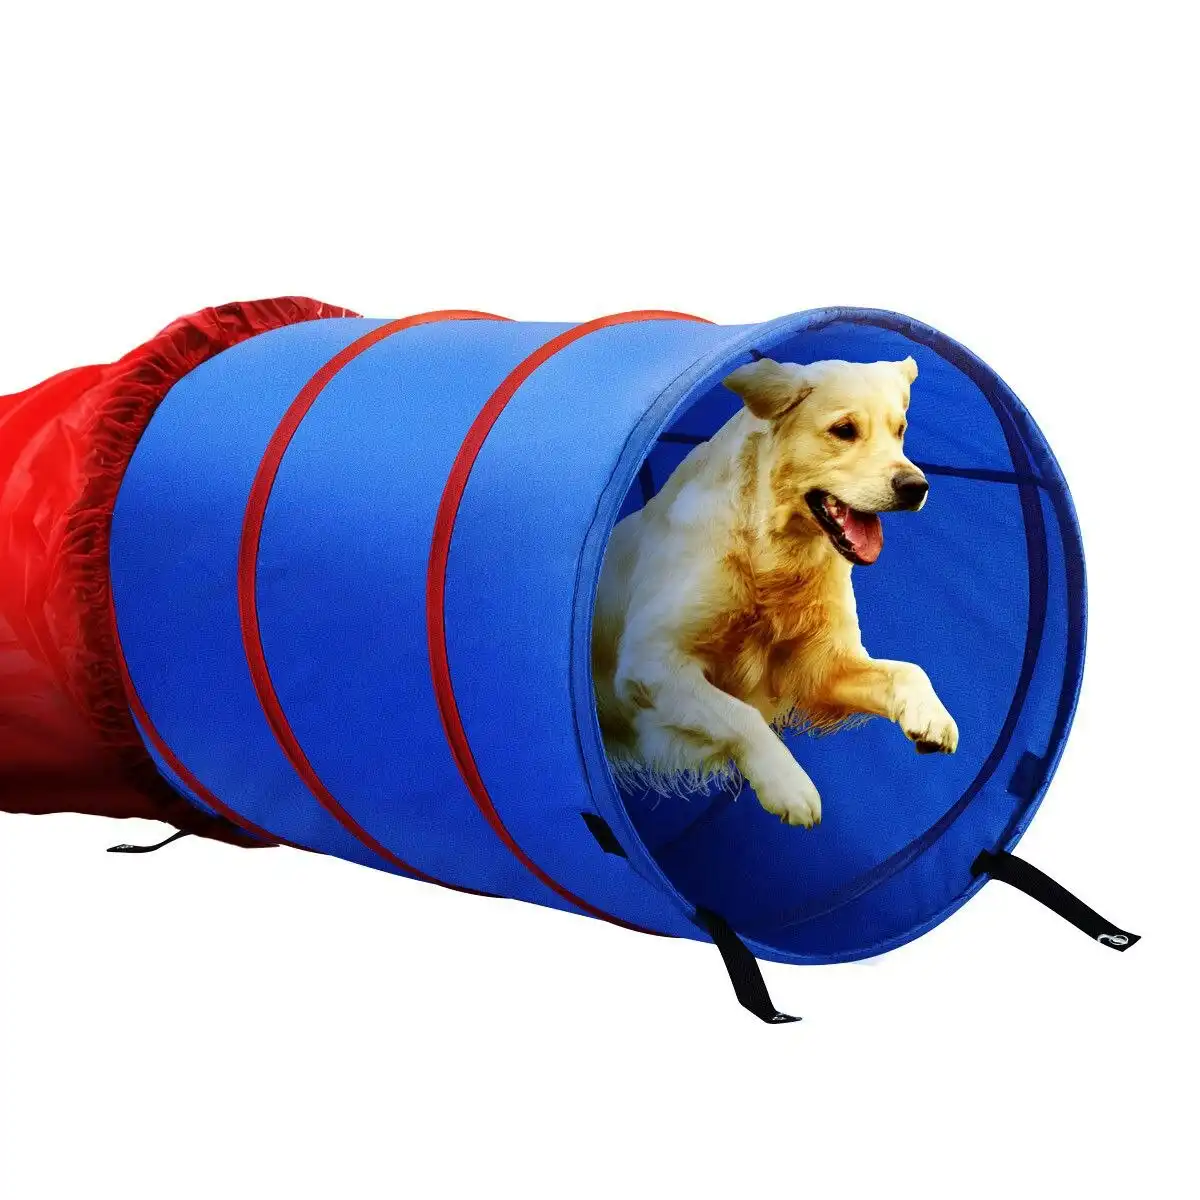 Ausway Pet Dog Tunnel Puppy Agility Equipment Interactive Toys Exercise Training with Carrying Case